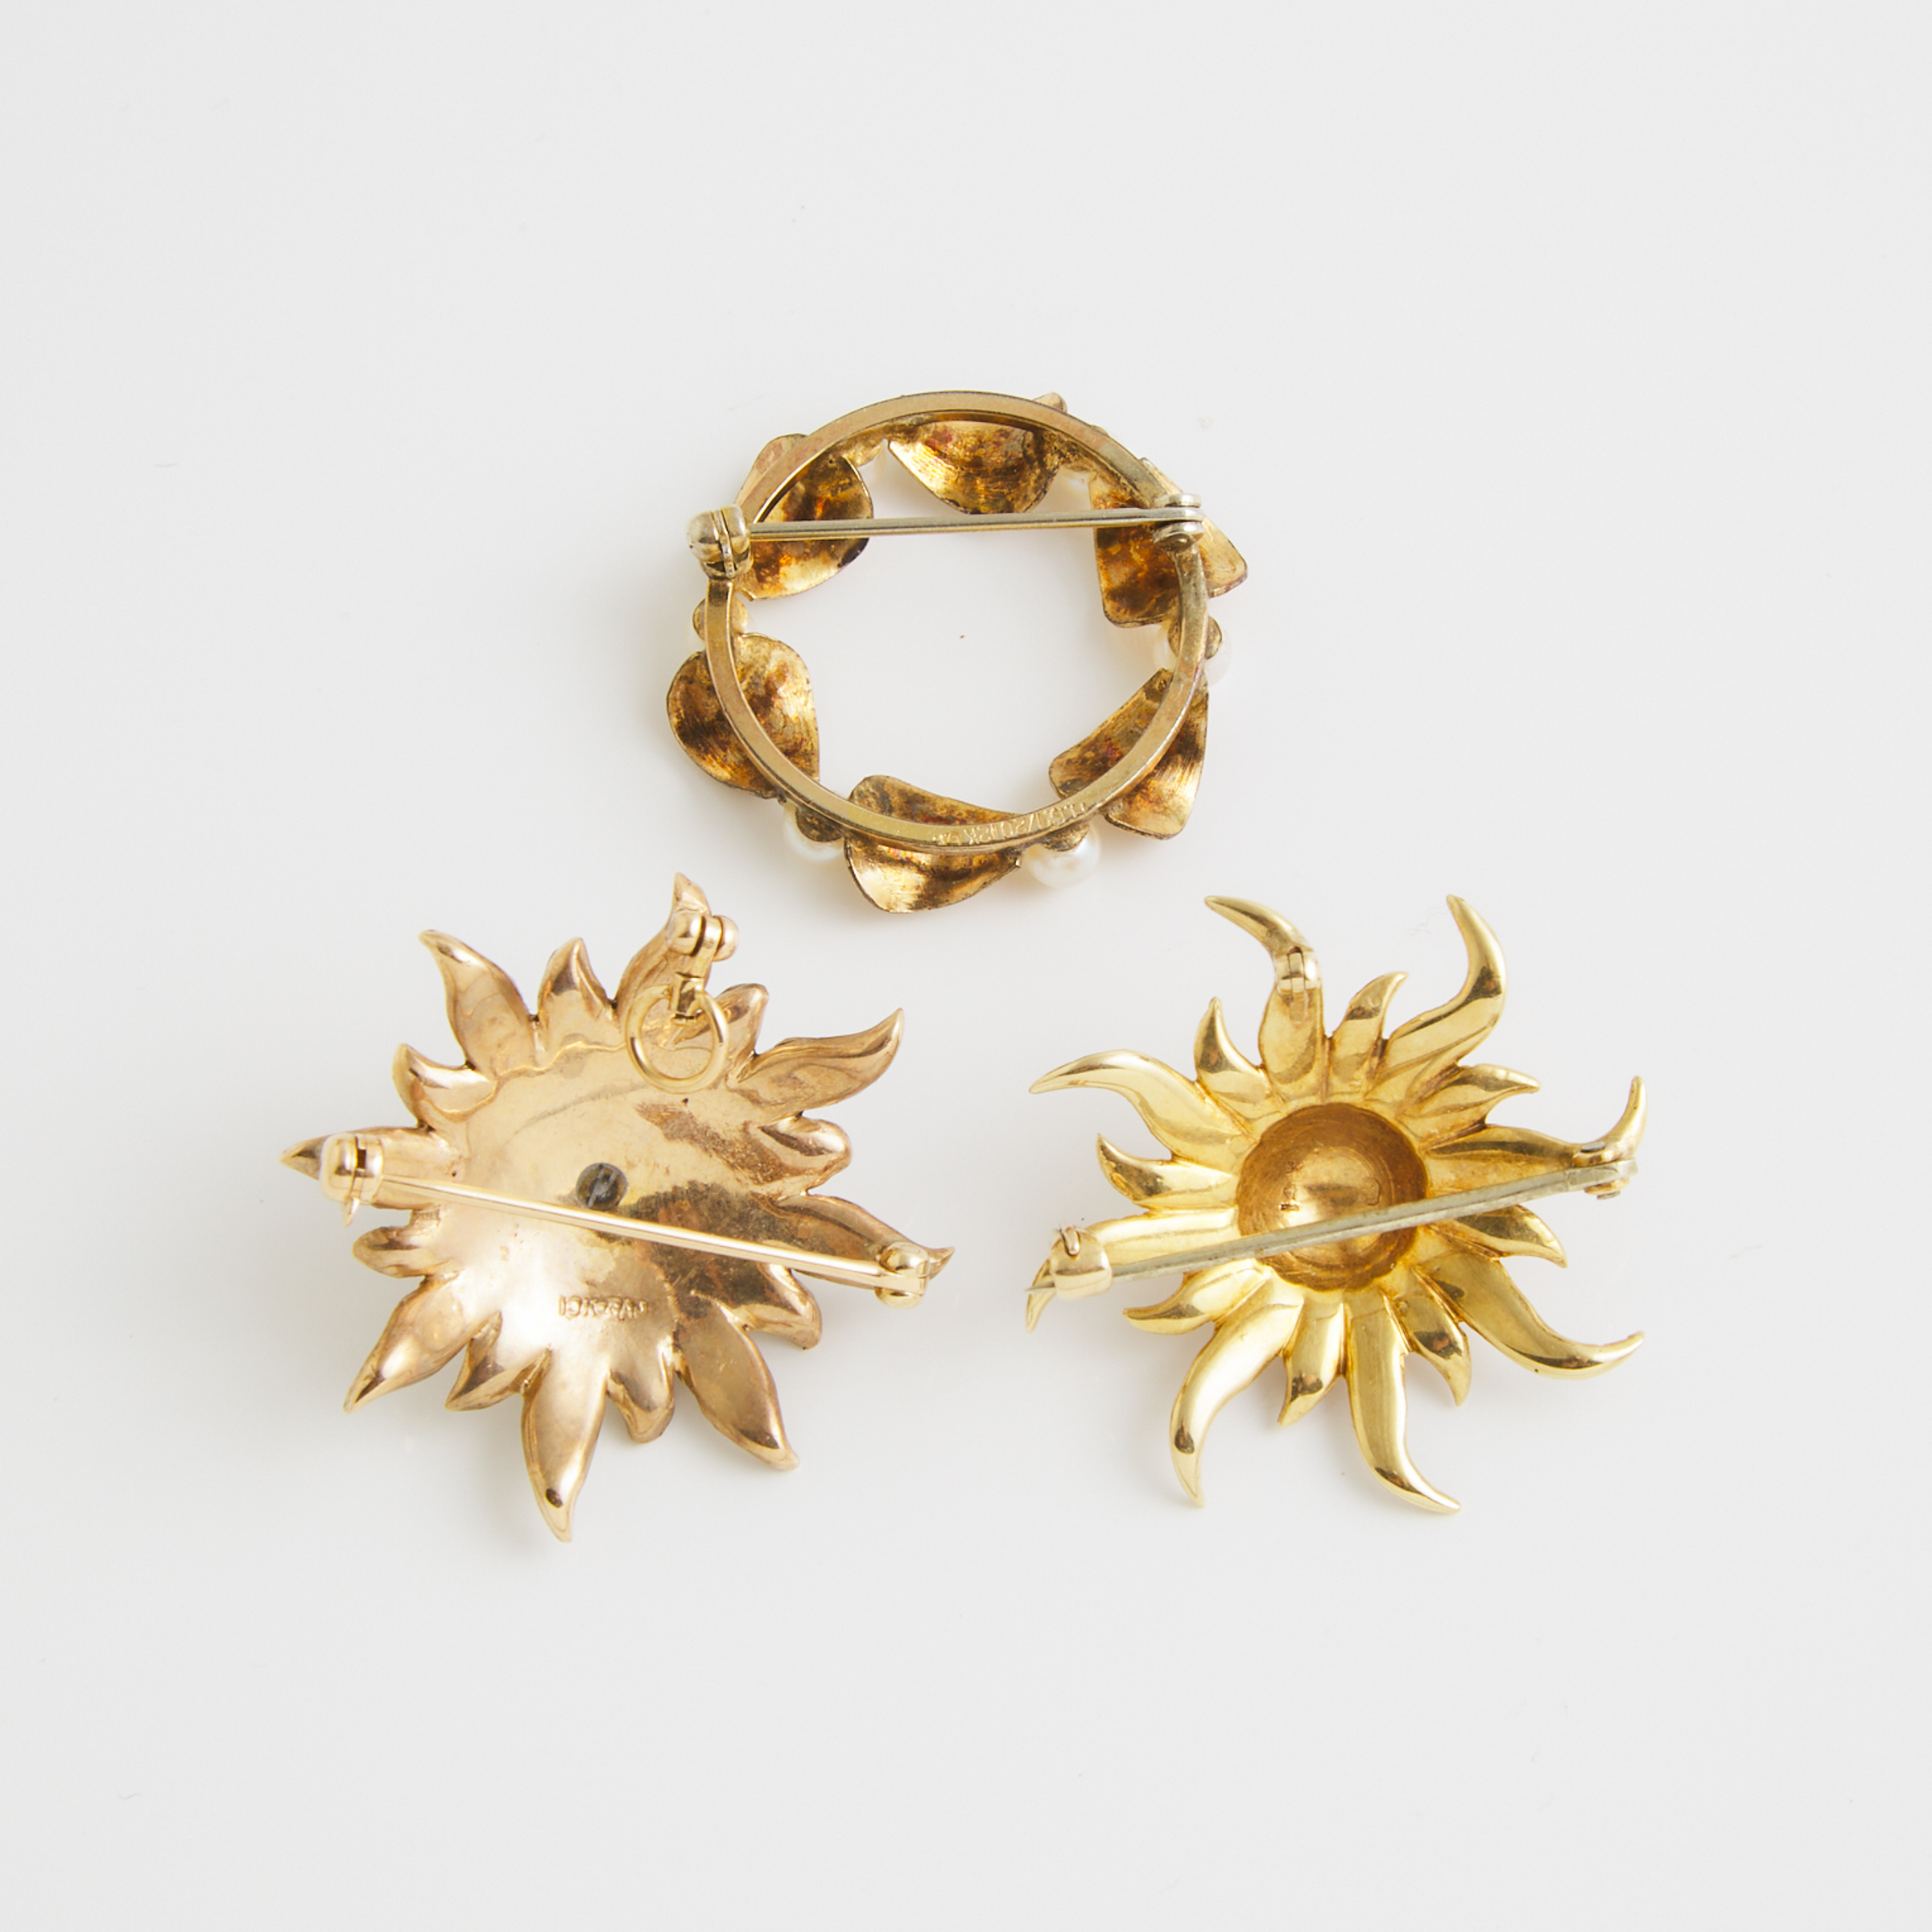 2 Yellow Gold Sunburst Pins And A Gold-Filled Pin